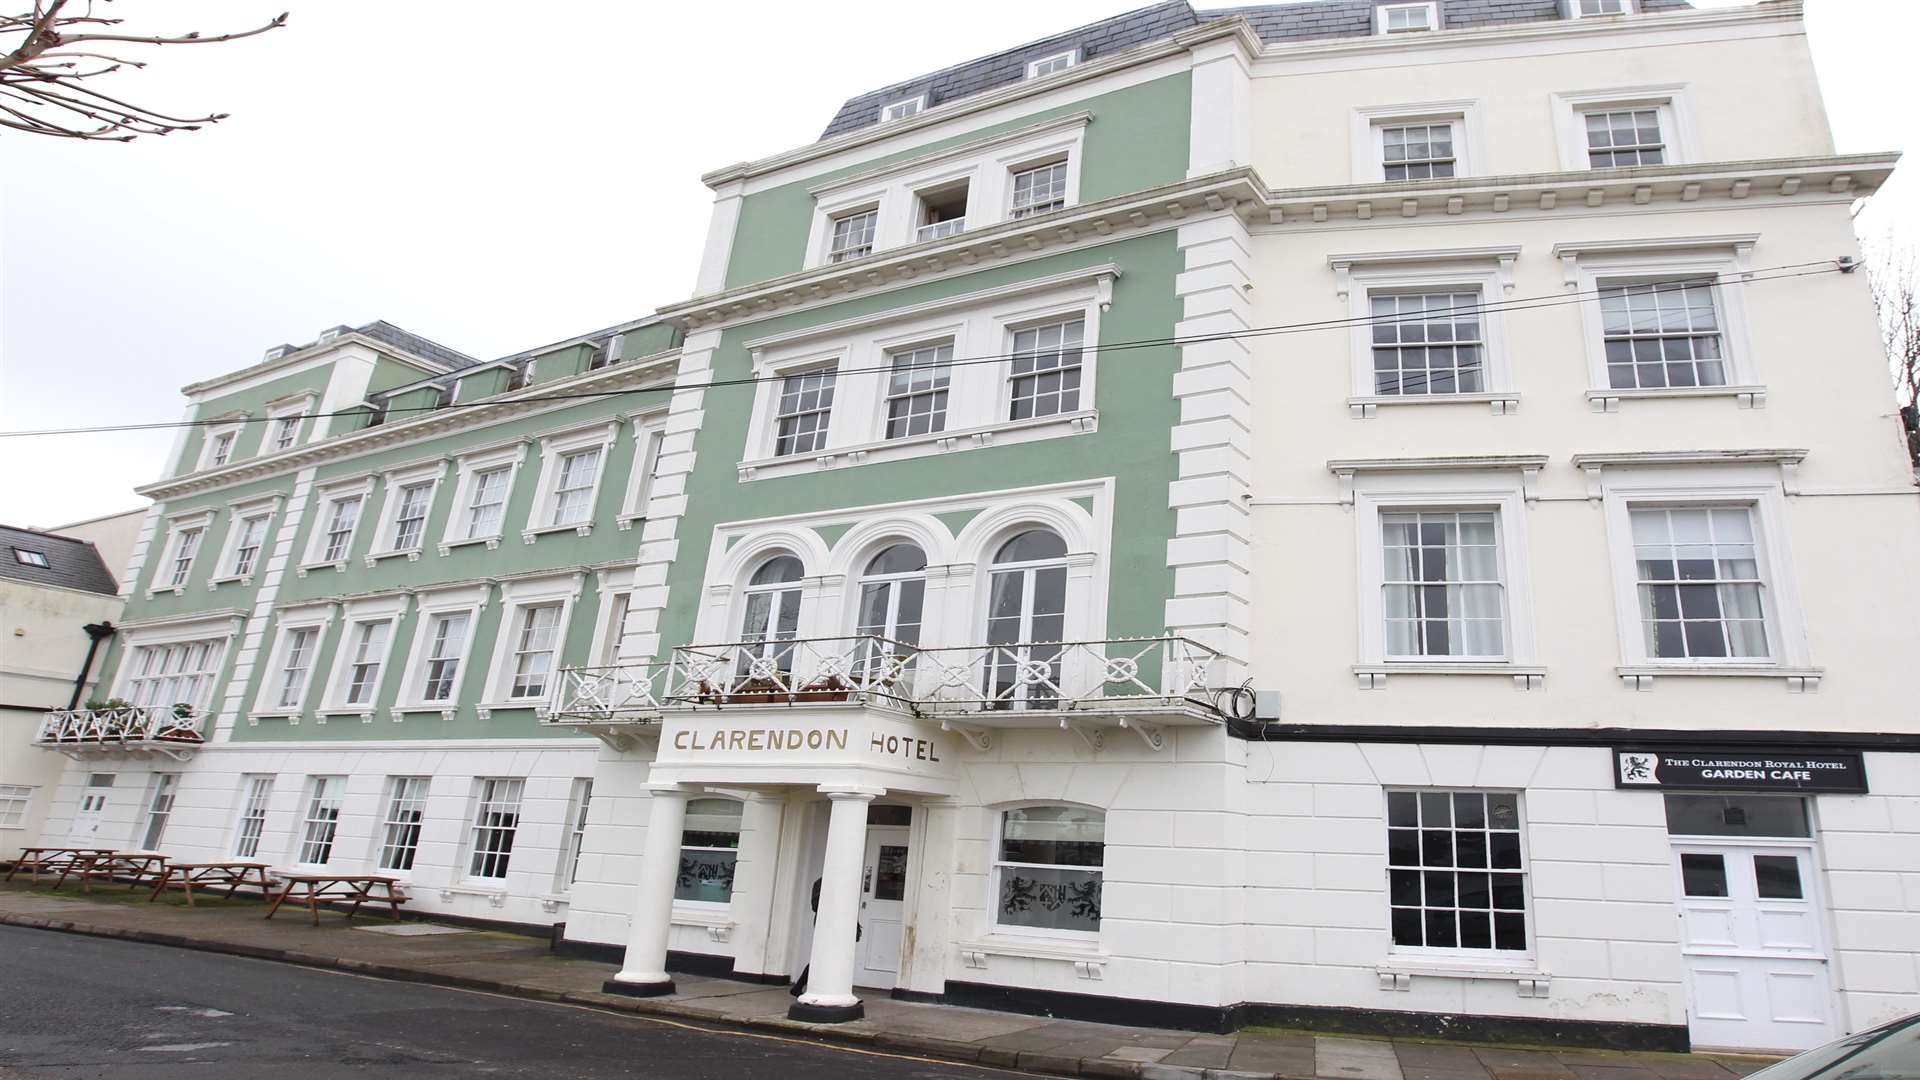 The Clarendon Royal Hotel